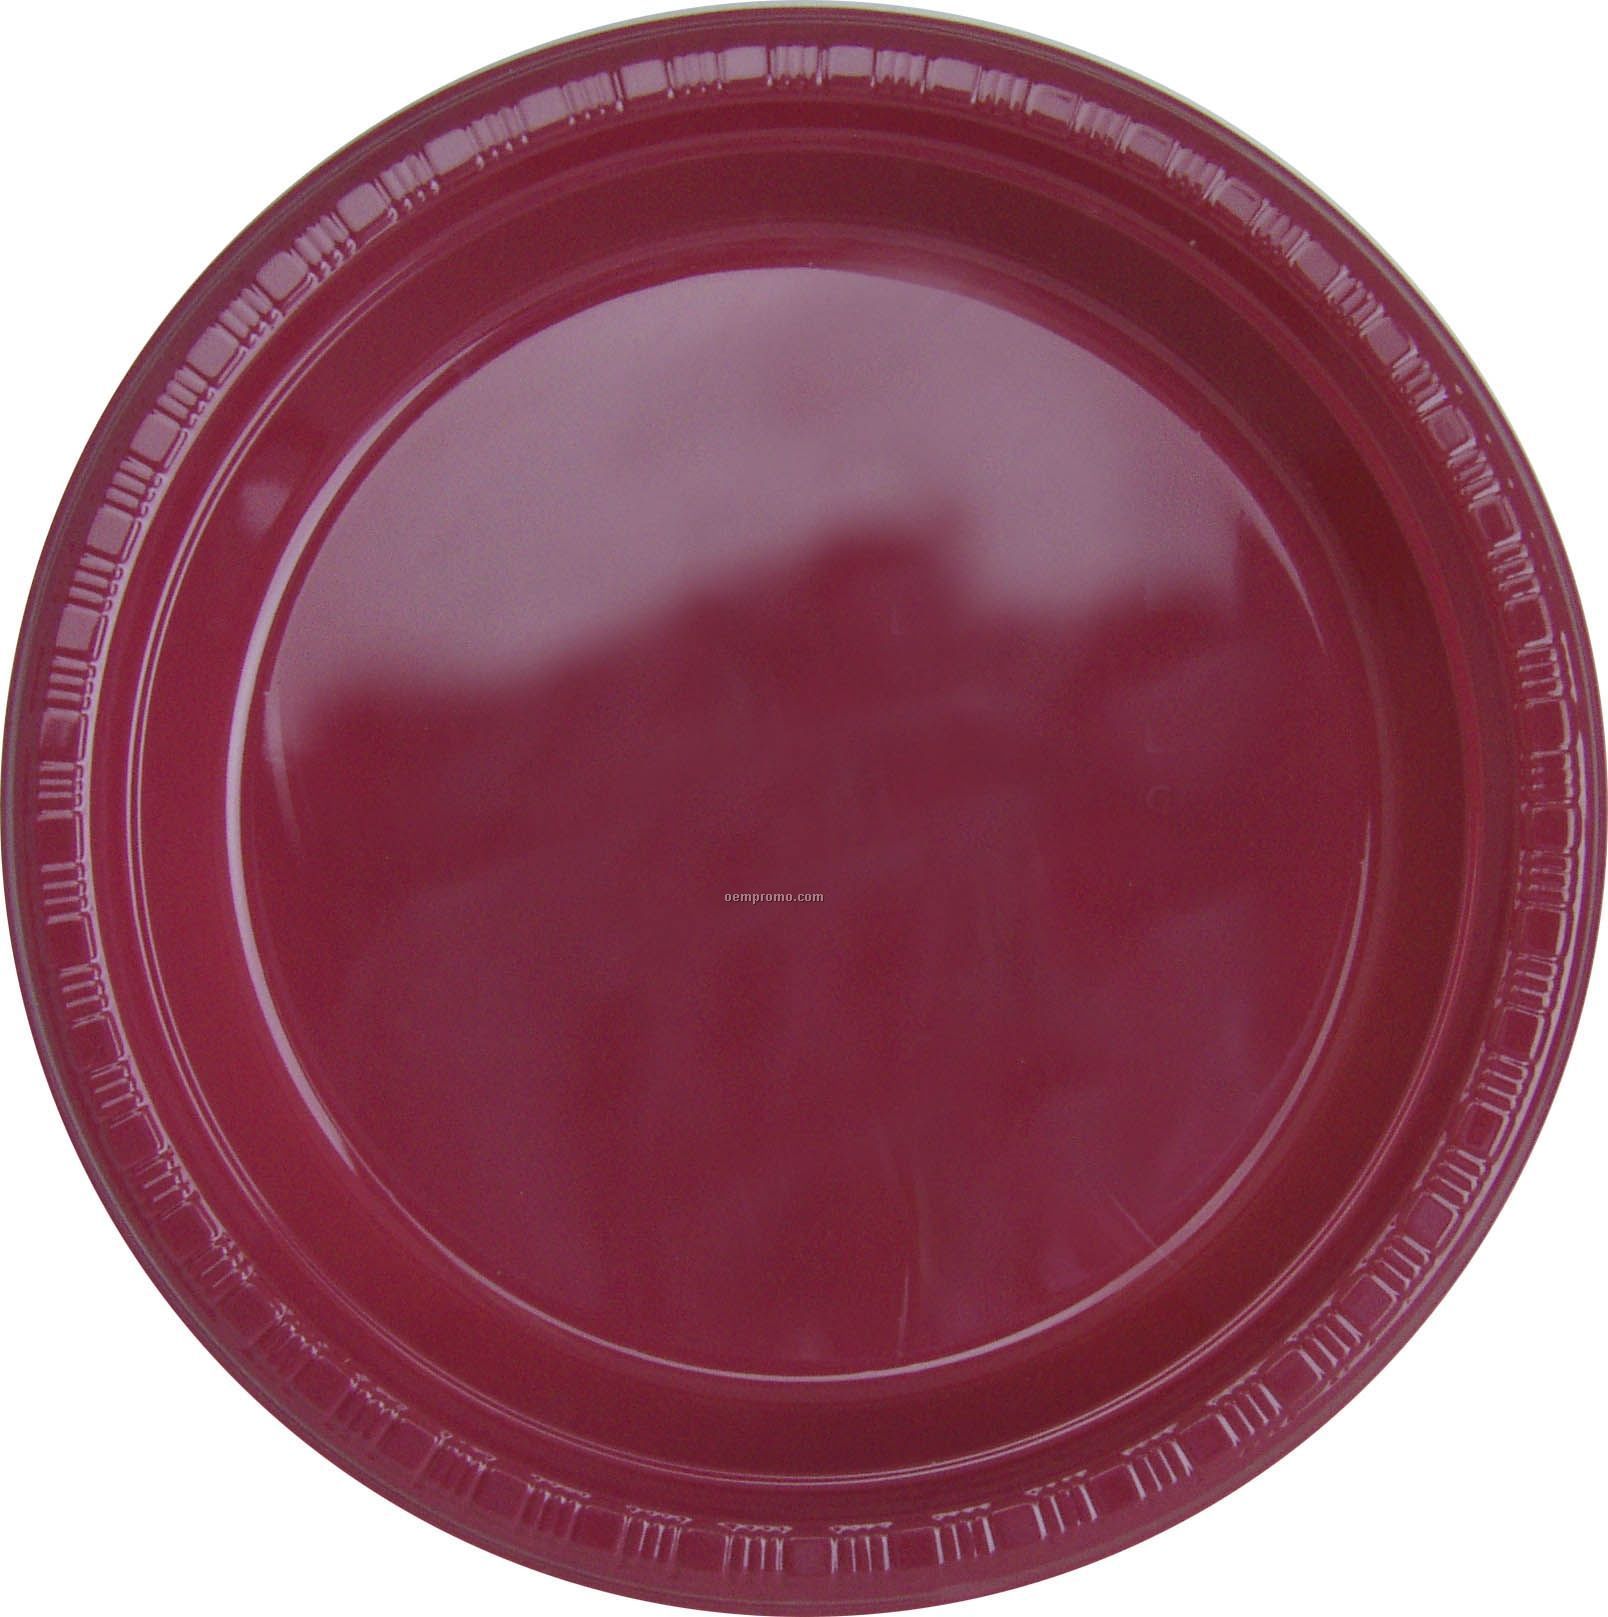 9" Round Burgundy Royale Red Colorware Paper Plate